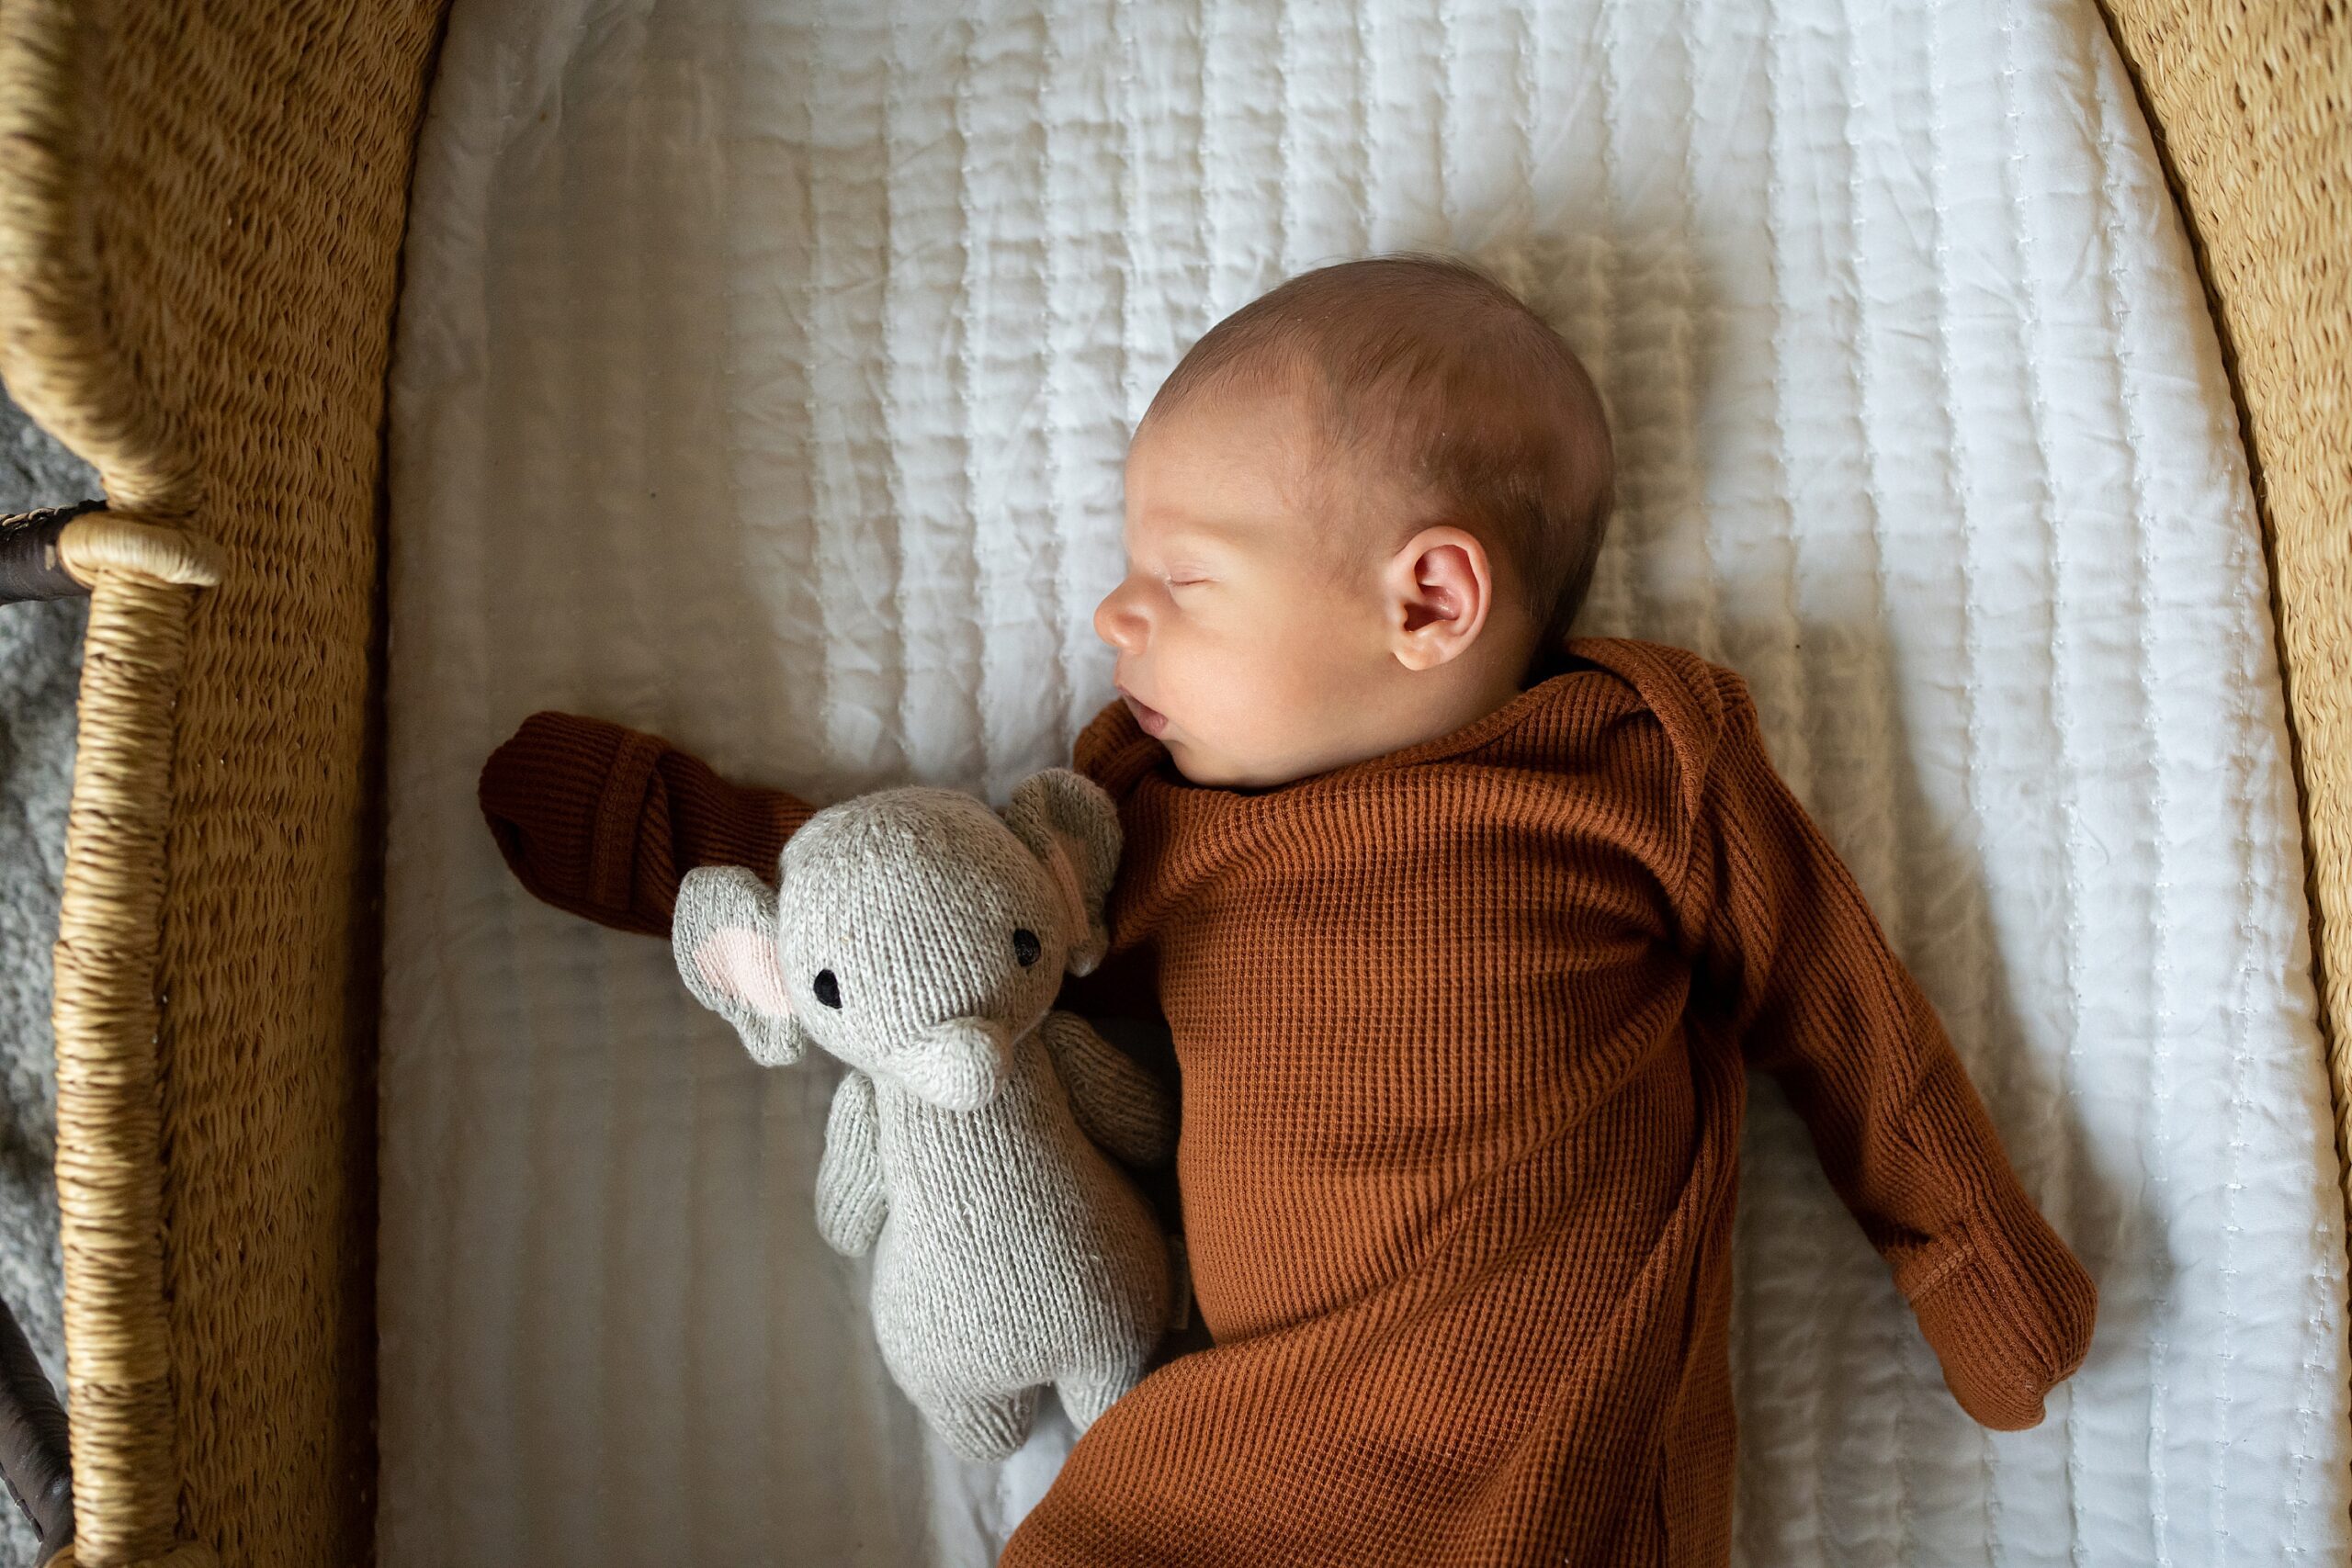 A newborn baby sleeping peacefully in a bassinet with a stuffed animal by its side.